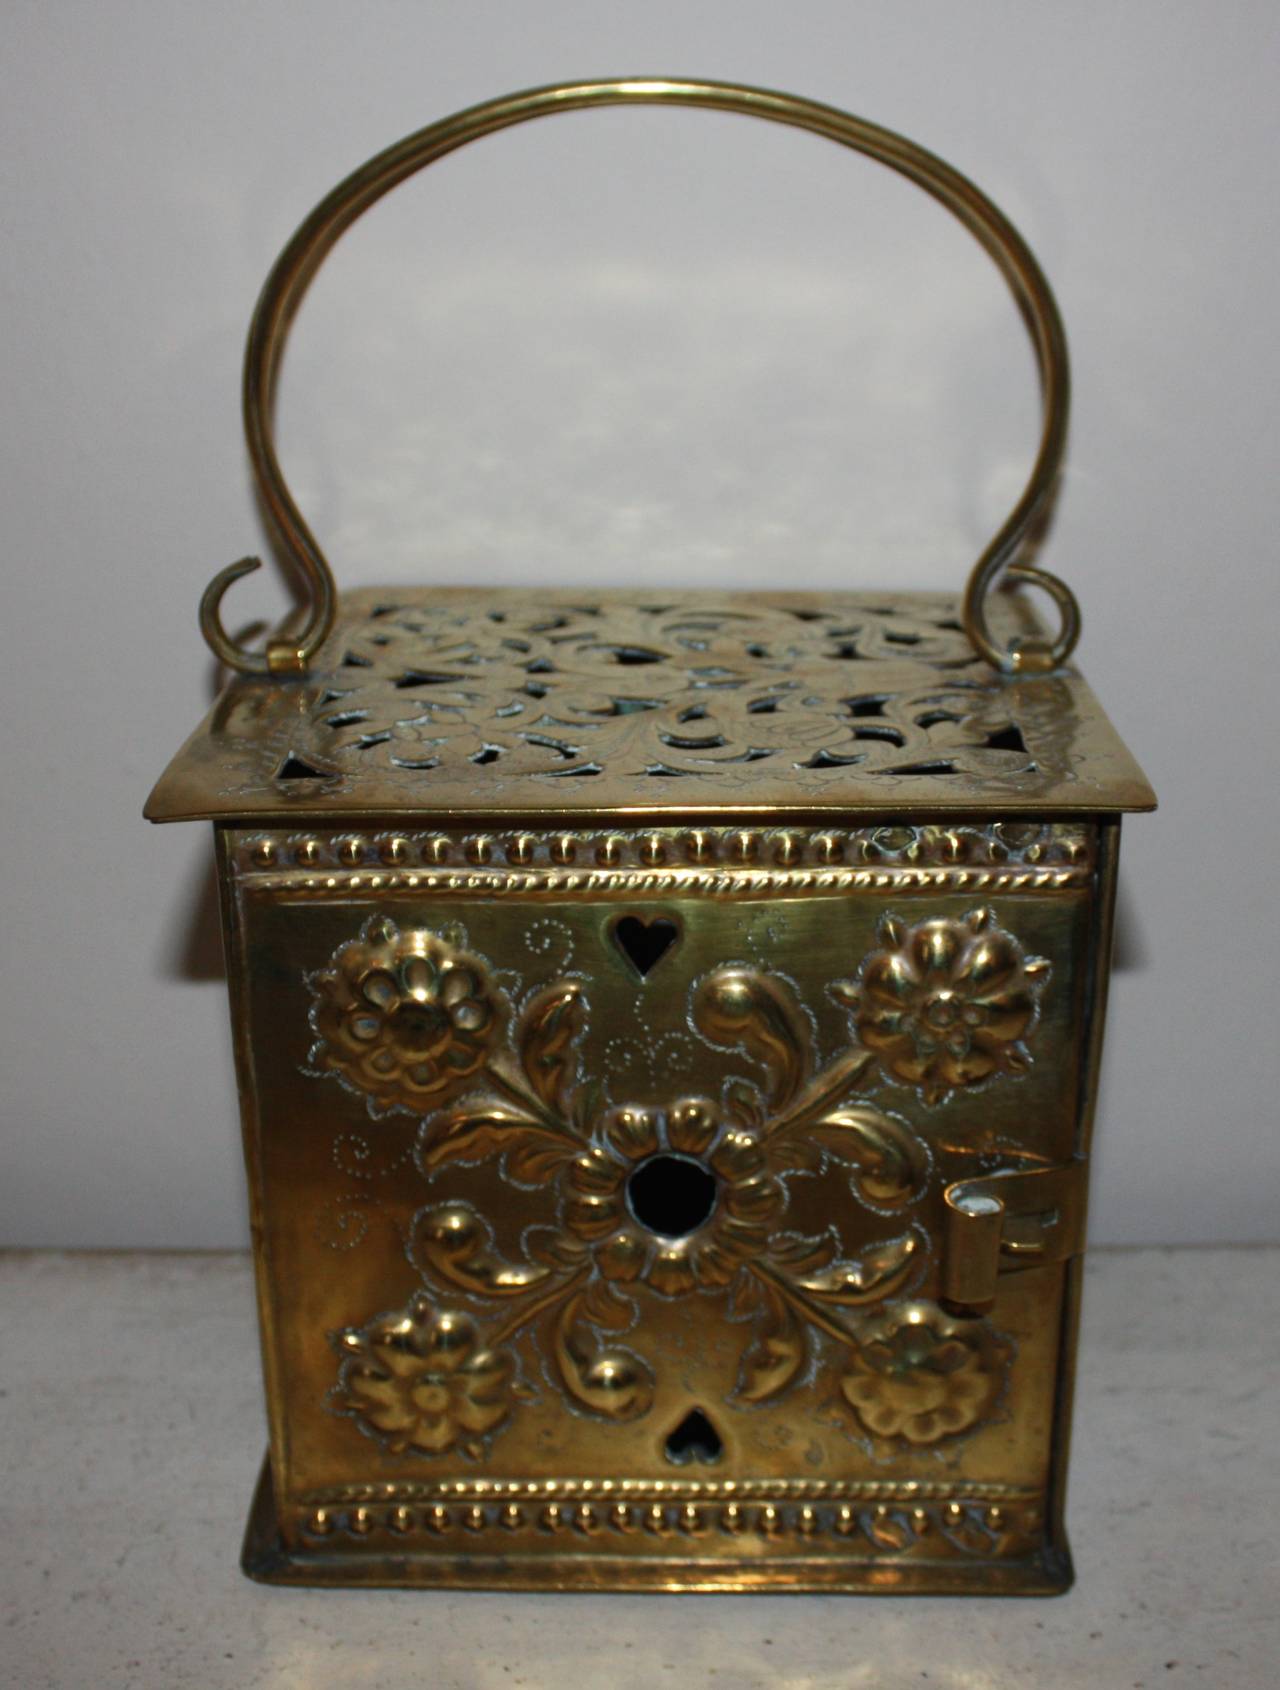 Fantastic brass footwarmer or lantern, used to bring to church so that one could keep warm in the rather cold churches at the time. But could be used with a candle and be a very decorative lantern.